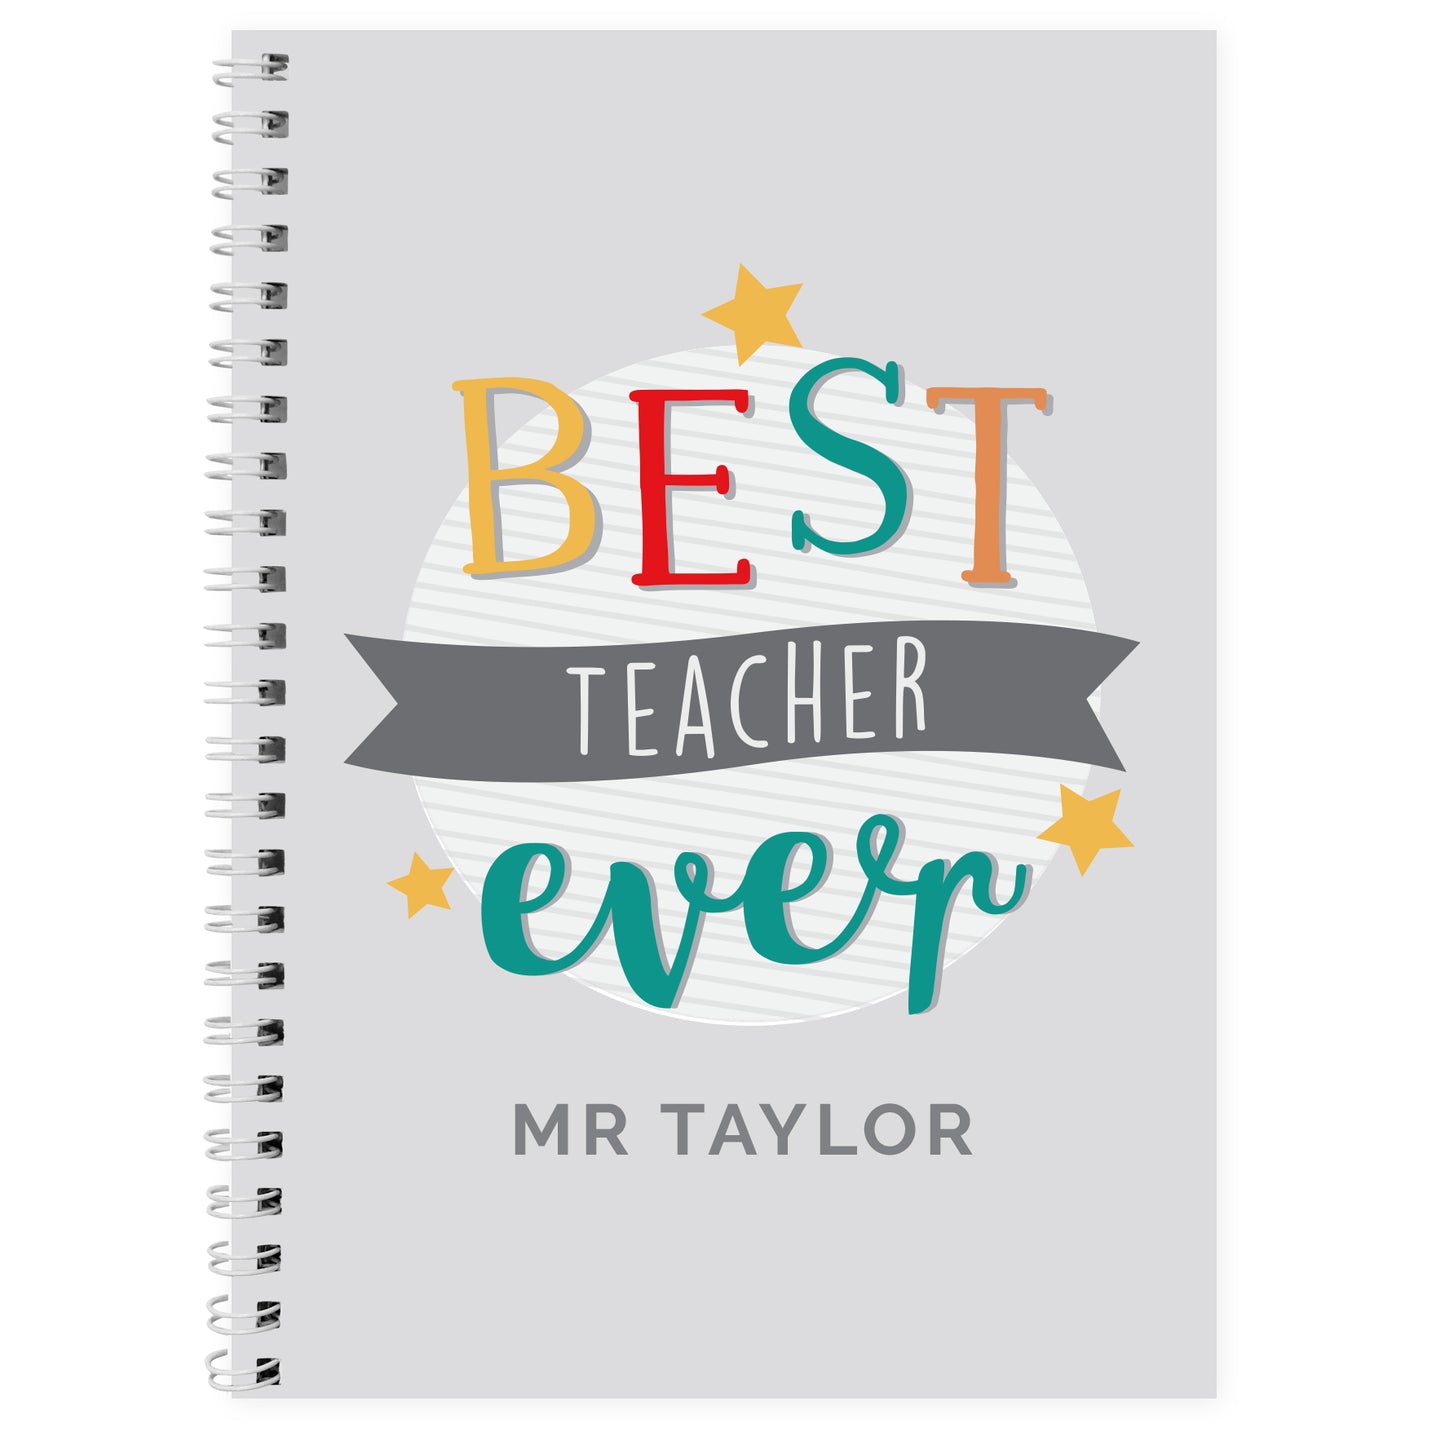 Personalised 'Best Teacher Ever' A5 Notebook - Personalise It!